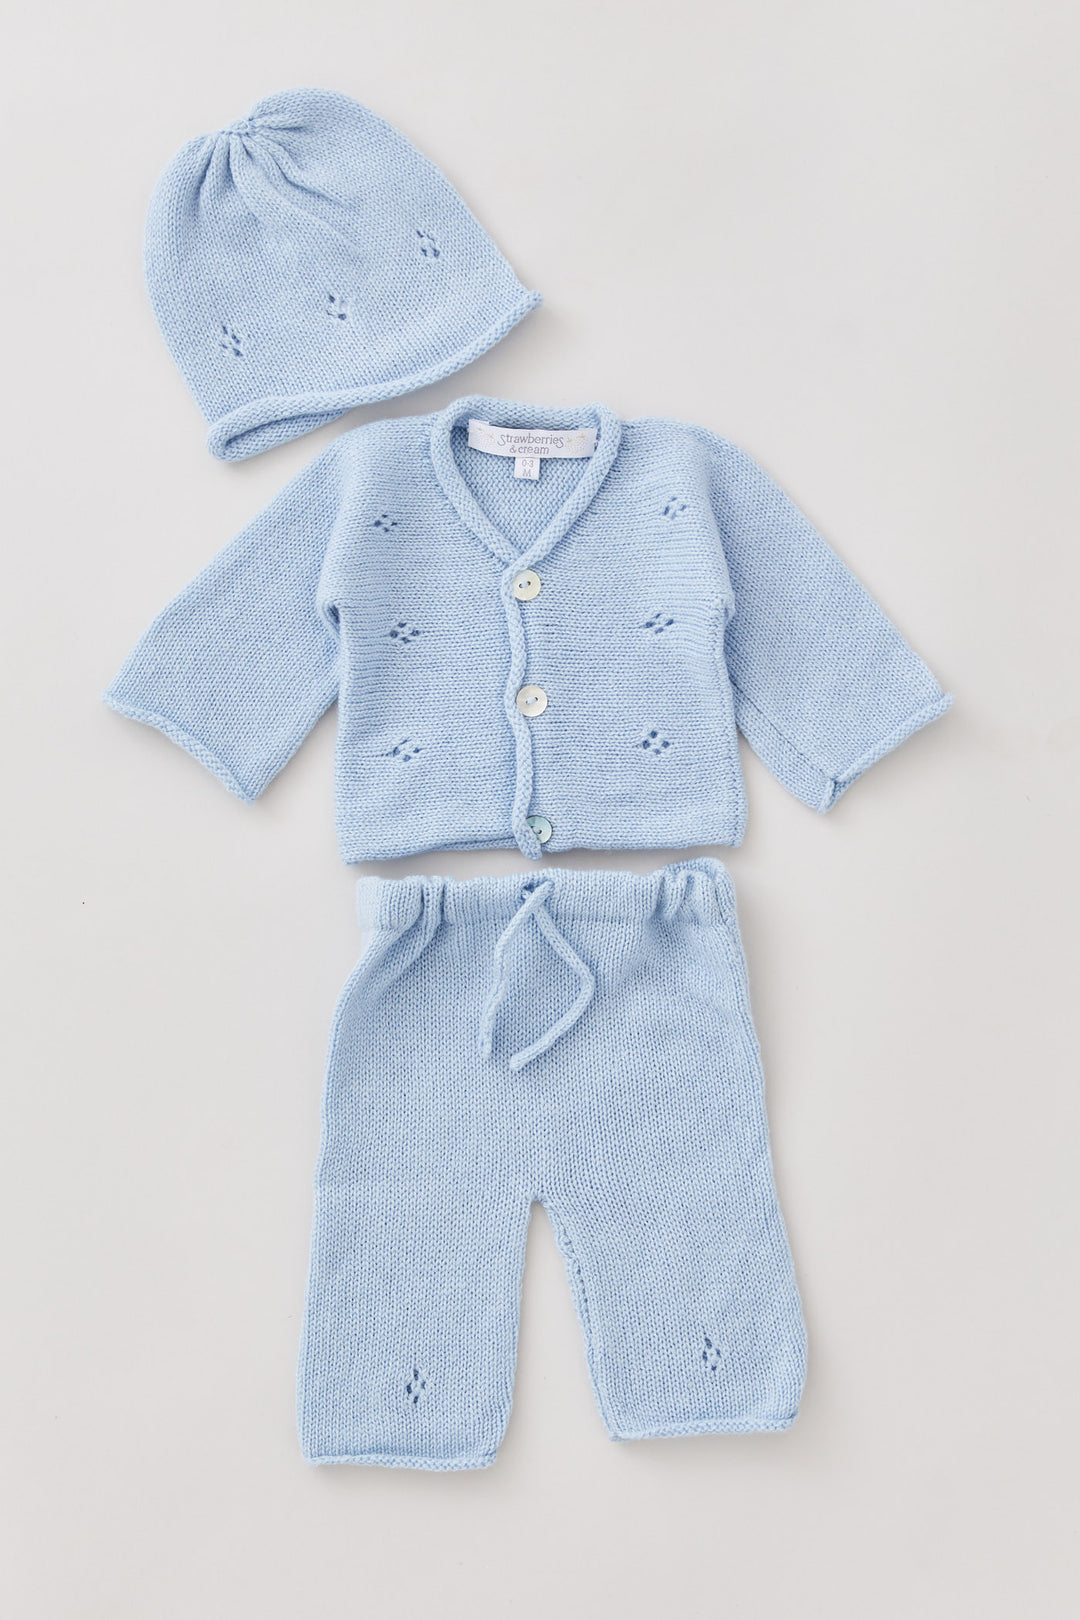 Cashmere Diamond 3 Pieces With Sweater Set in Baby Blue - Designed by Ingrid Lewis - Strawberries & Cream